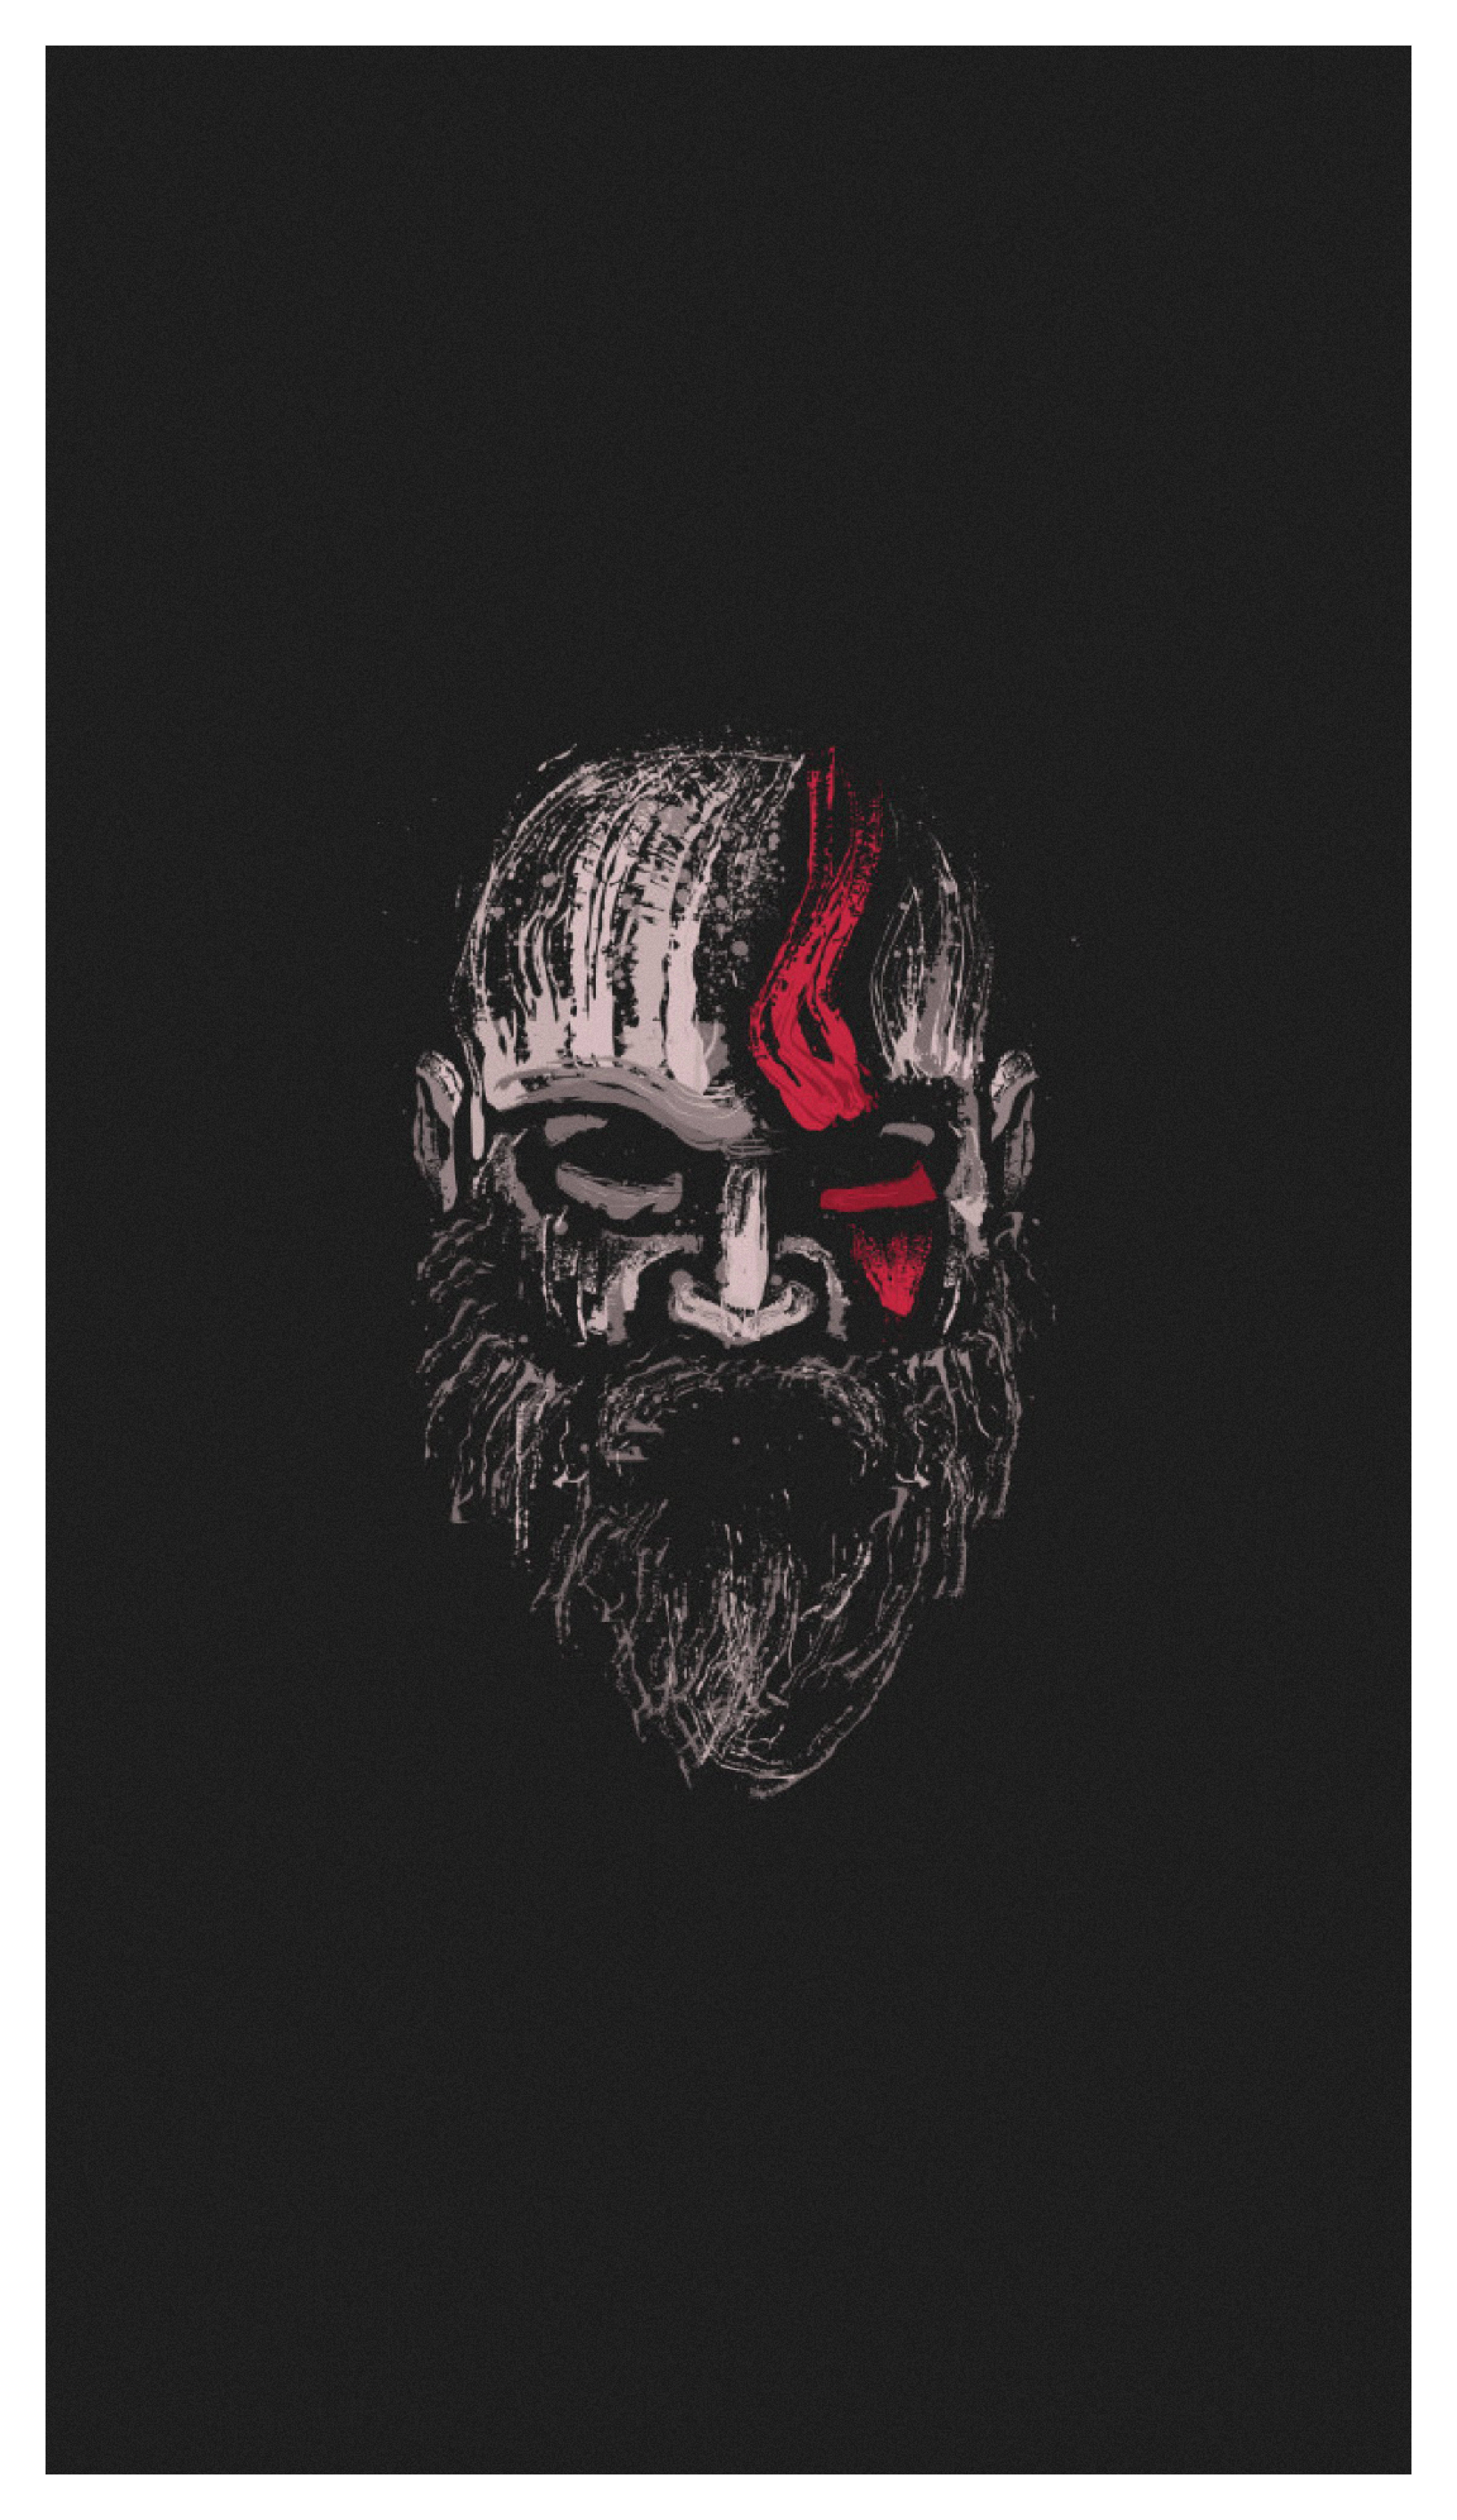 Intense Action with Kratos in Black and Red Gaming Aesthetics Wallpaper